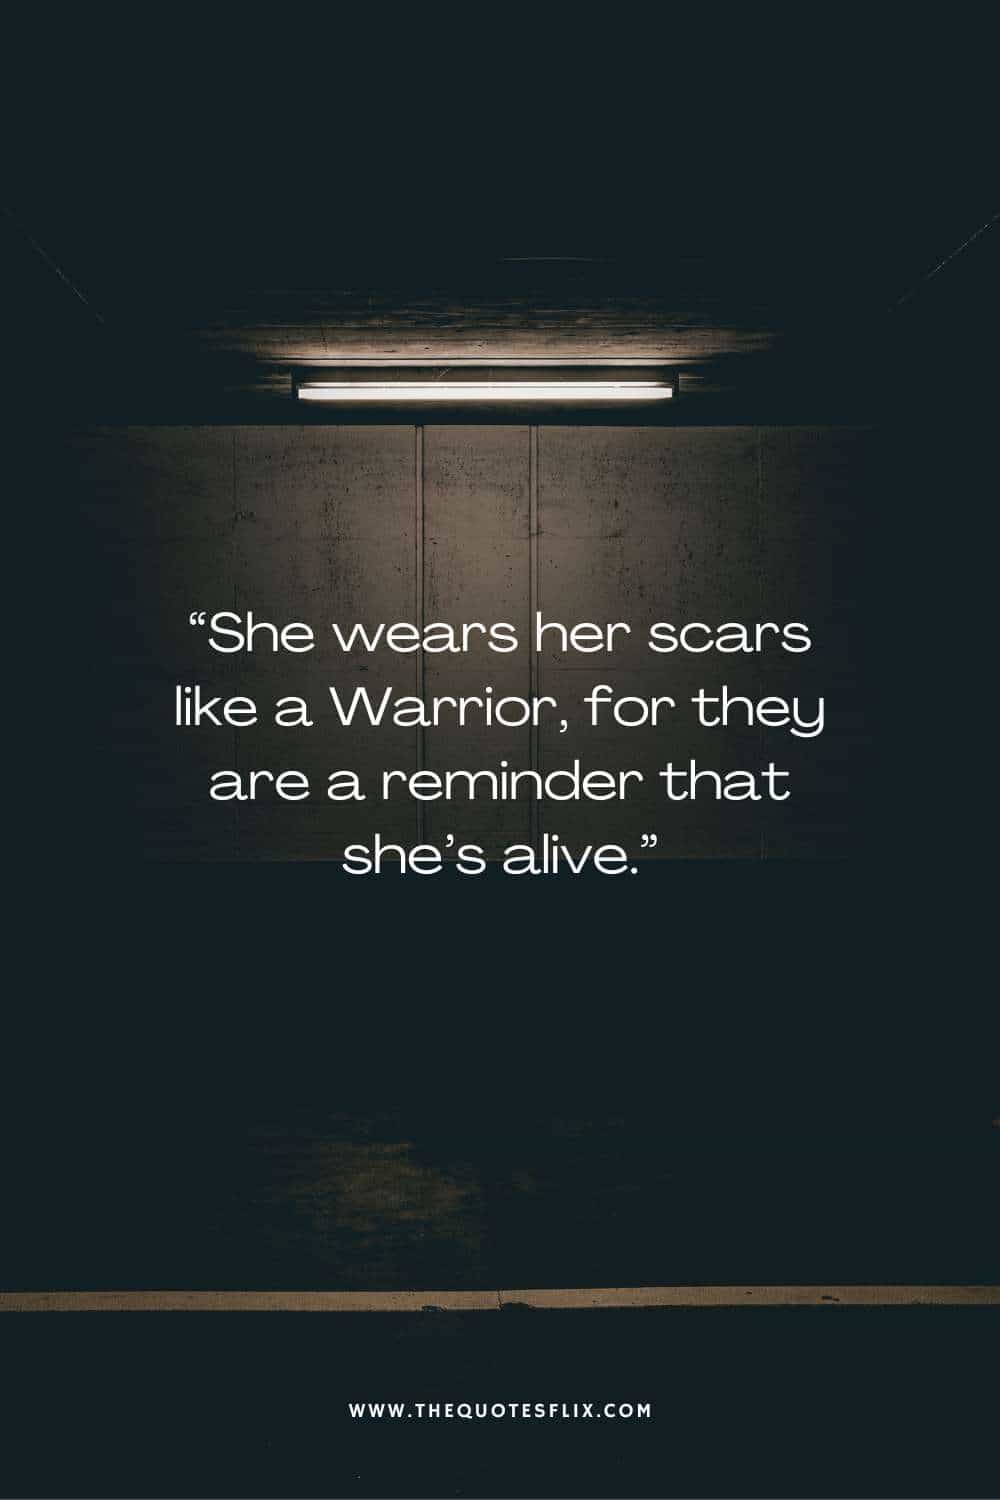 inspirational cervical cancer quotes - she wears scars like warrior shes alive